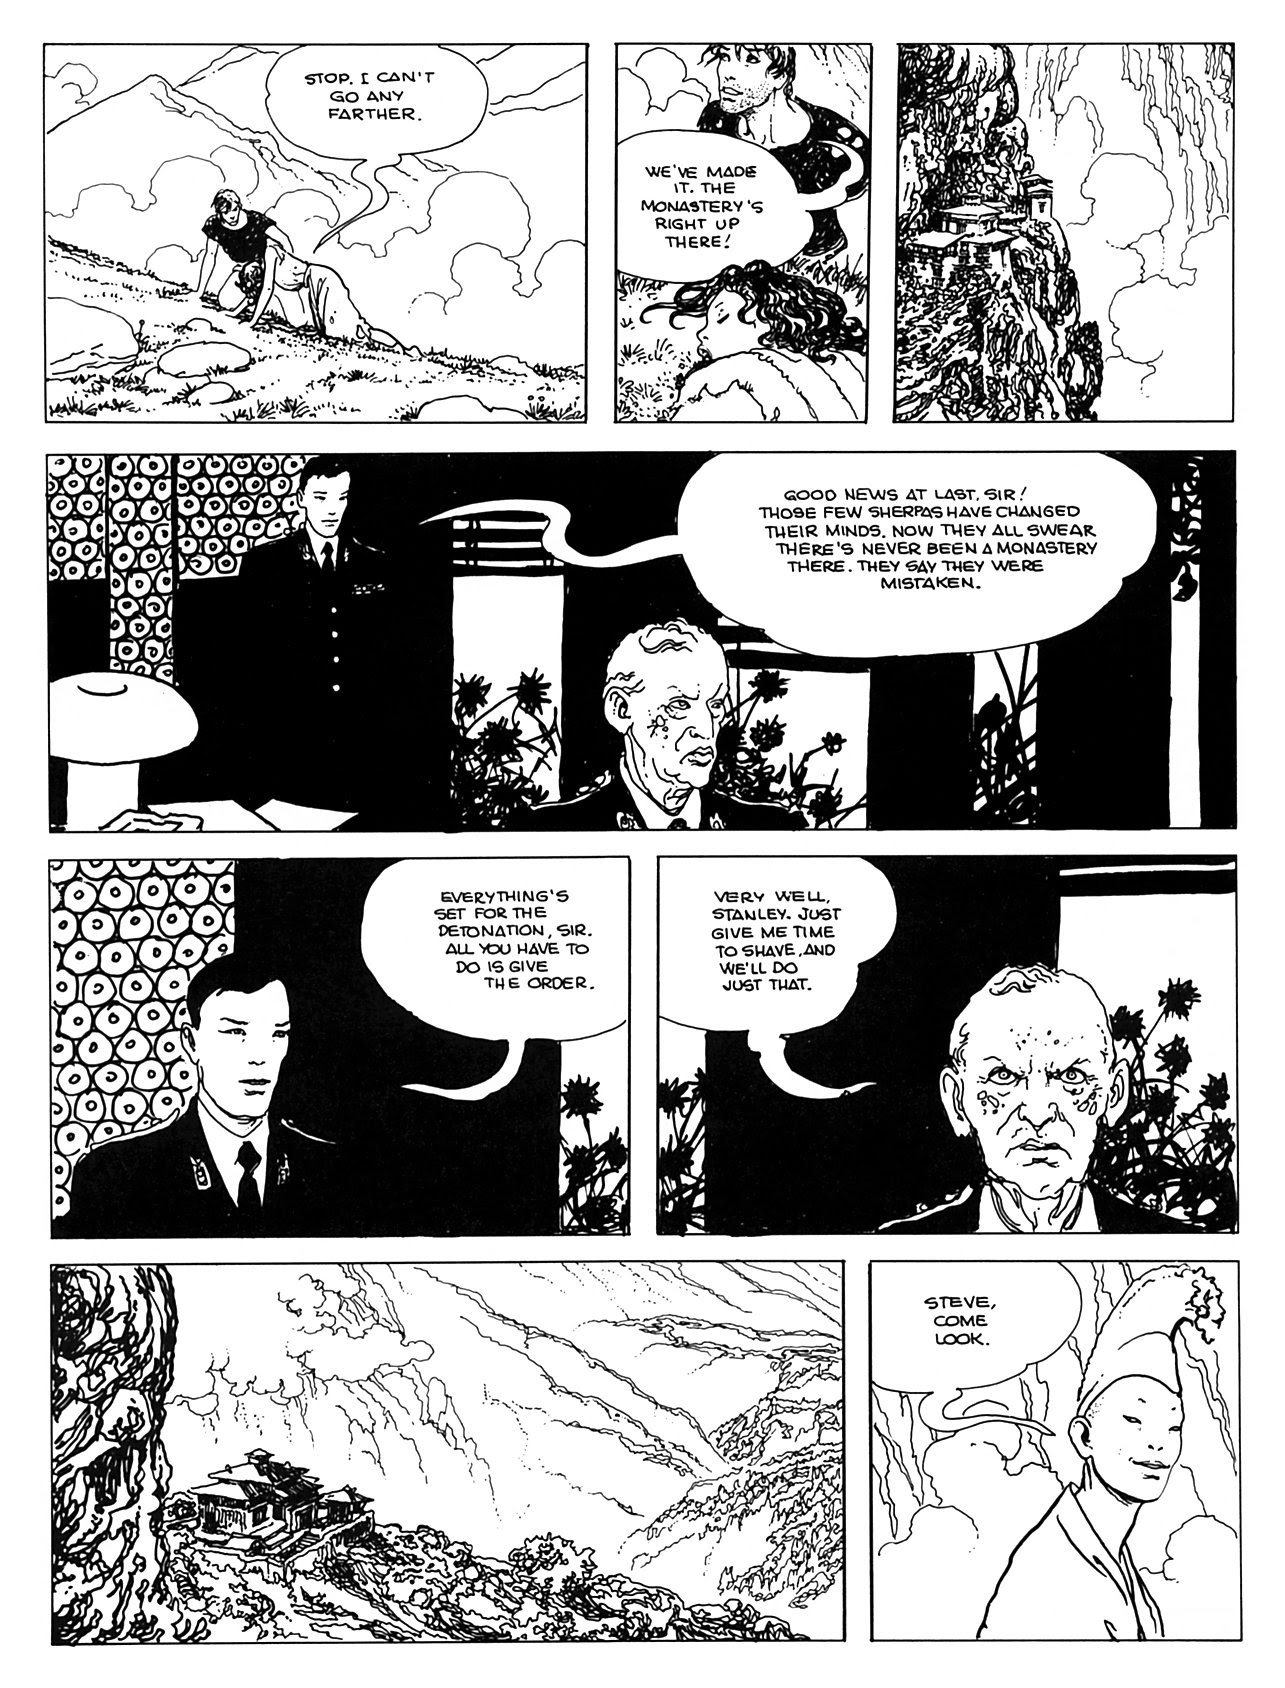 Read online Perchance to dream - The Indian adventures of Giuseppe Bergman comic -  Issue # TPB - 116